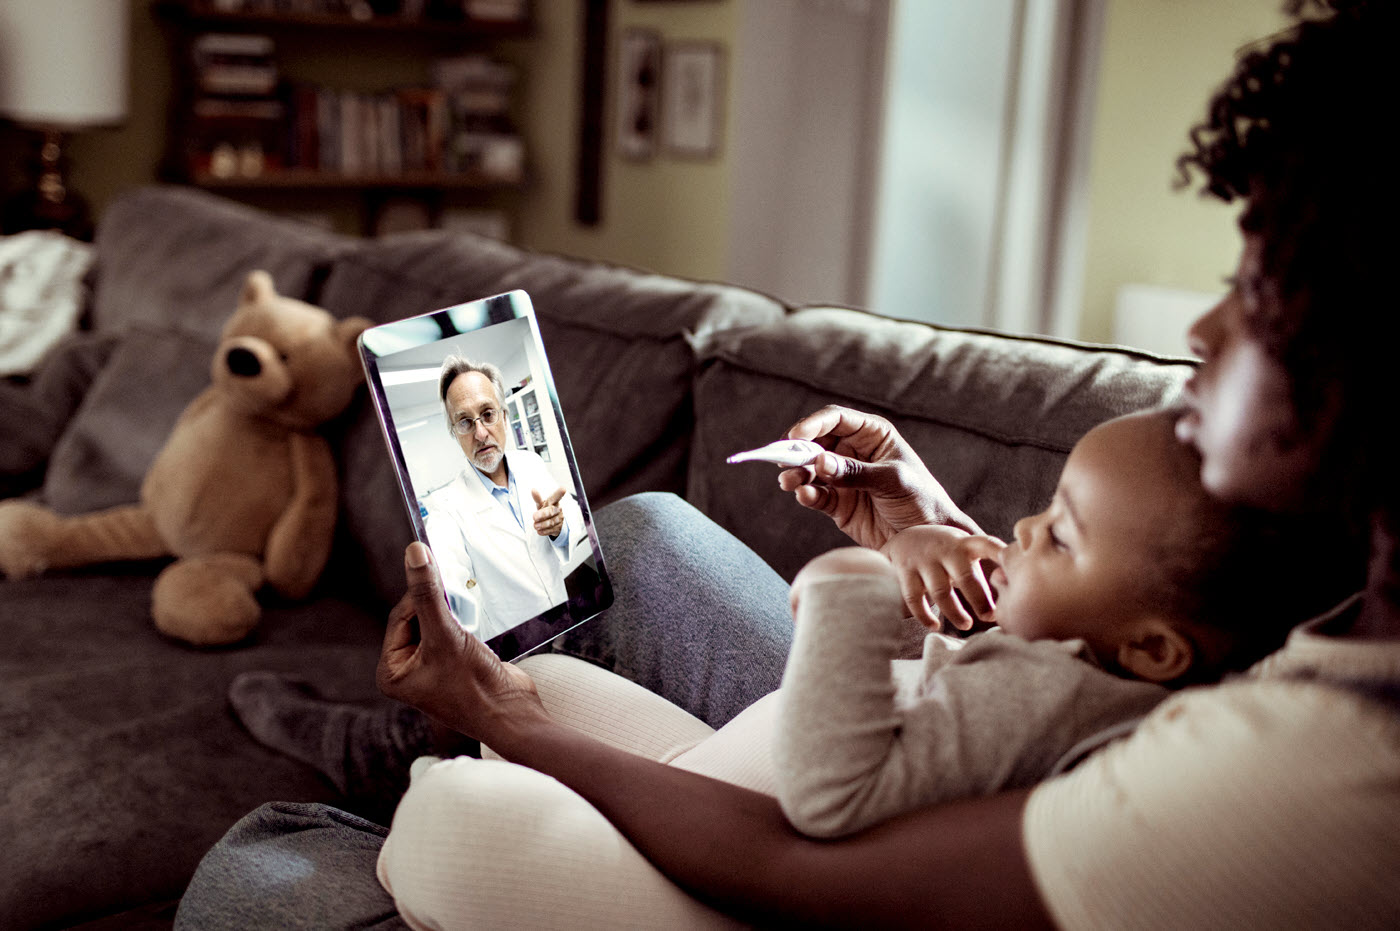 A mother and son in a virtual health meeting on a tablet device with a doctor